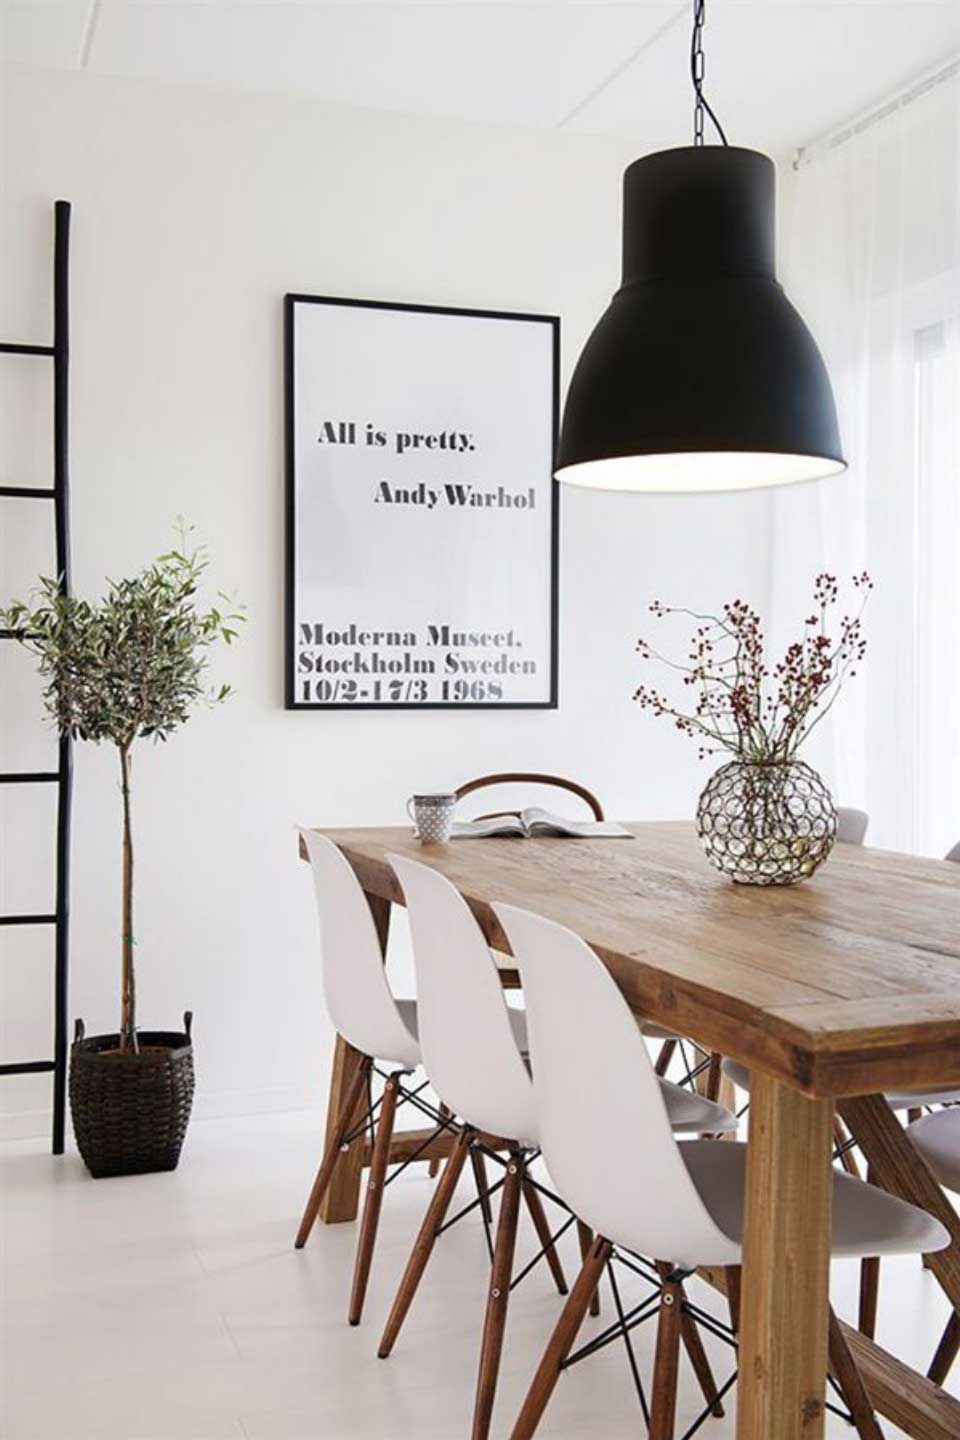 White Black Ideas Modern White Black Dining Room Ideas For Small Space And Rustic Expanding Teak Wooden Dining Table Design And Futuristic Black Hanging Lamp Idea Also White Wall Paint Colors Dining Room The Best Simple Dining Room Ideas